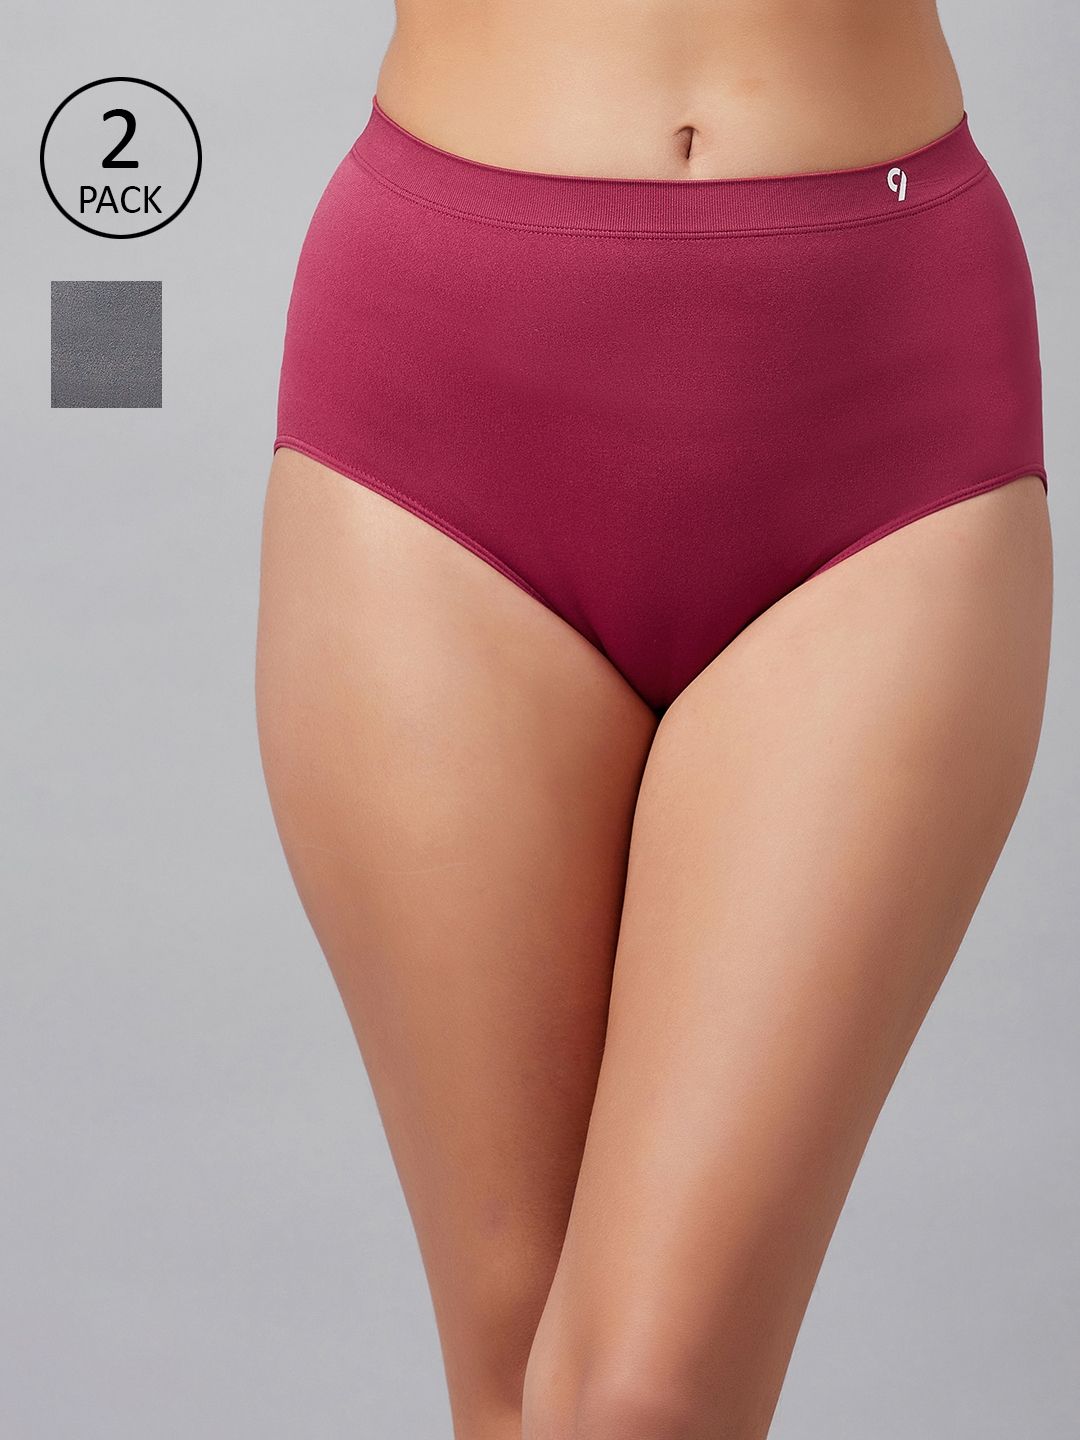 NWTS VASSARETTE SIZE 7 HIPSTER PANTIES PANTY COLOR CHOCOLATE KISS STYLE  12309